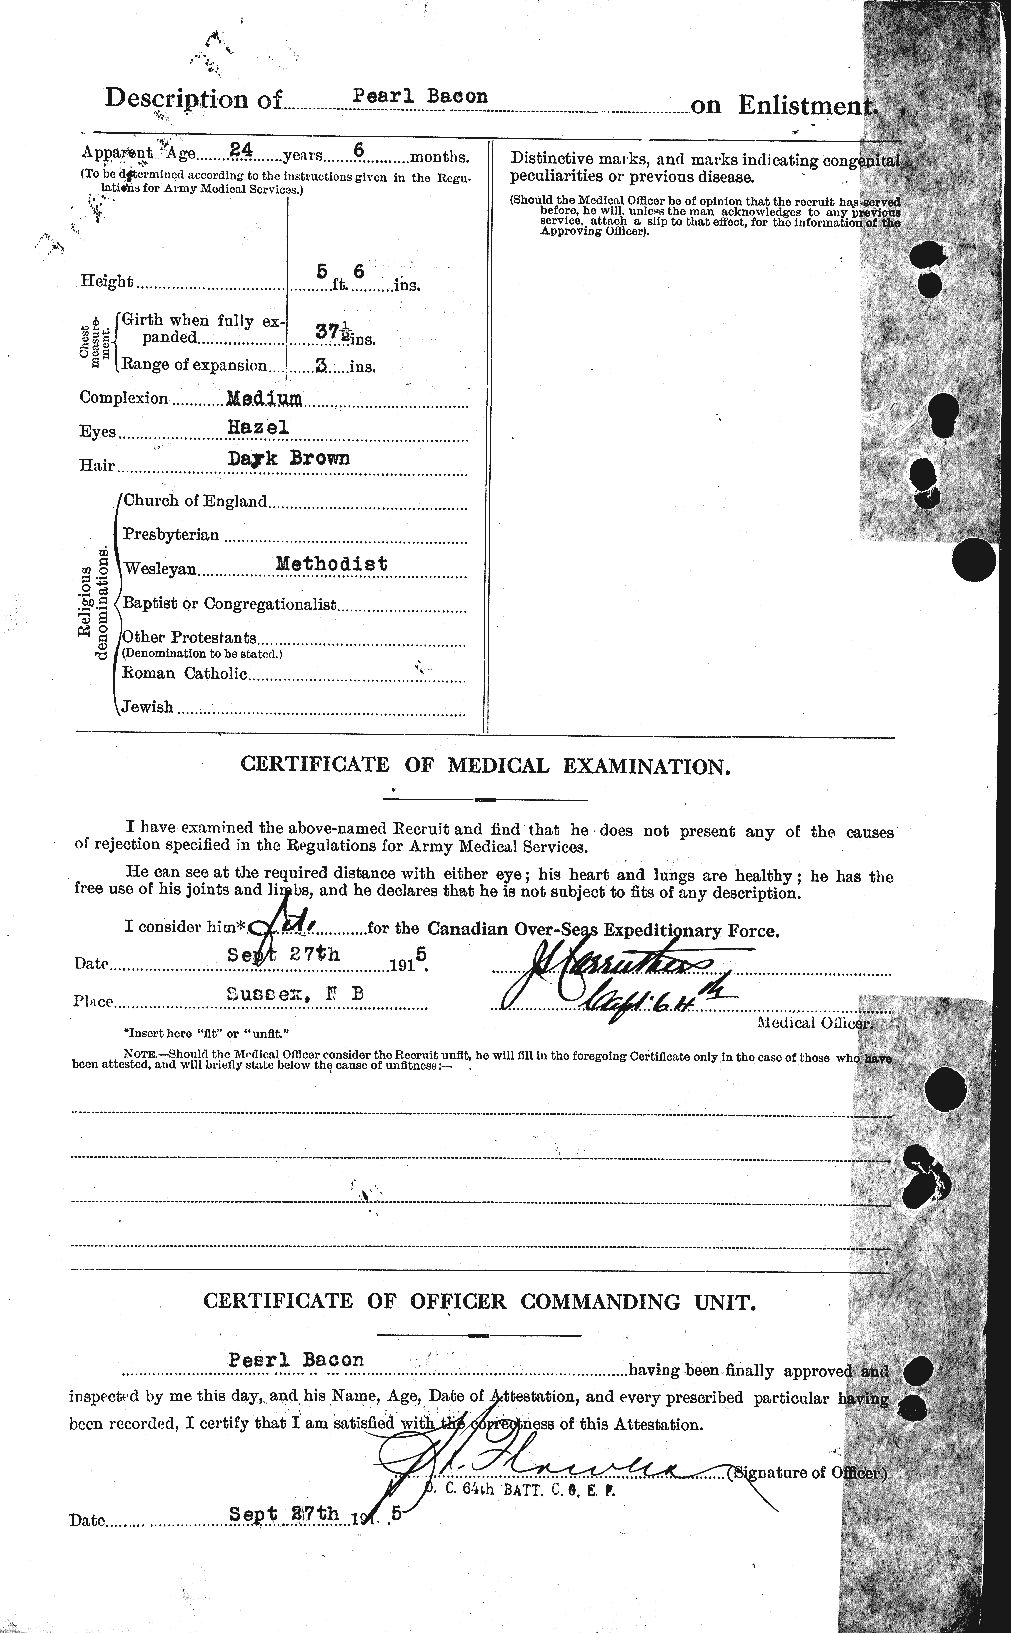 Personnel Records of the First World War - CEF 217859b